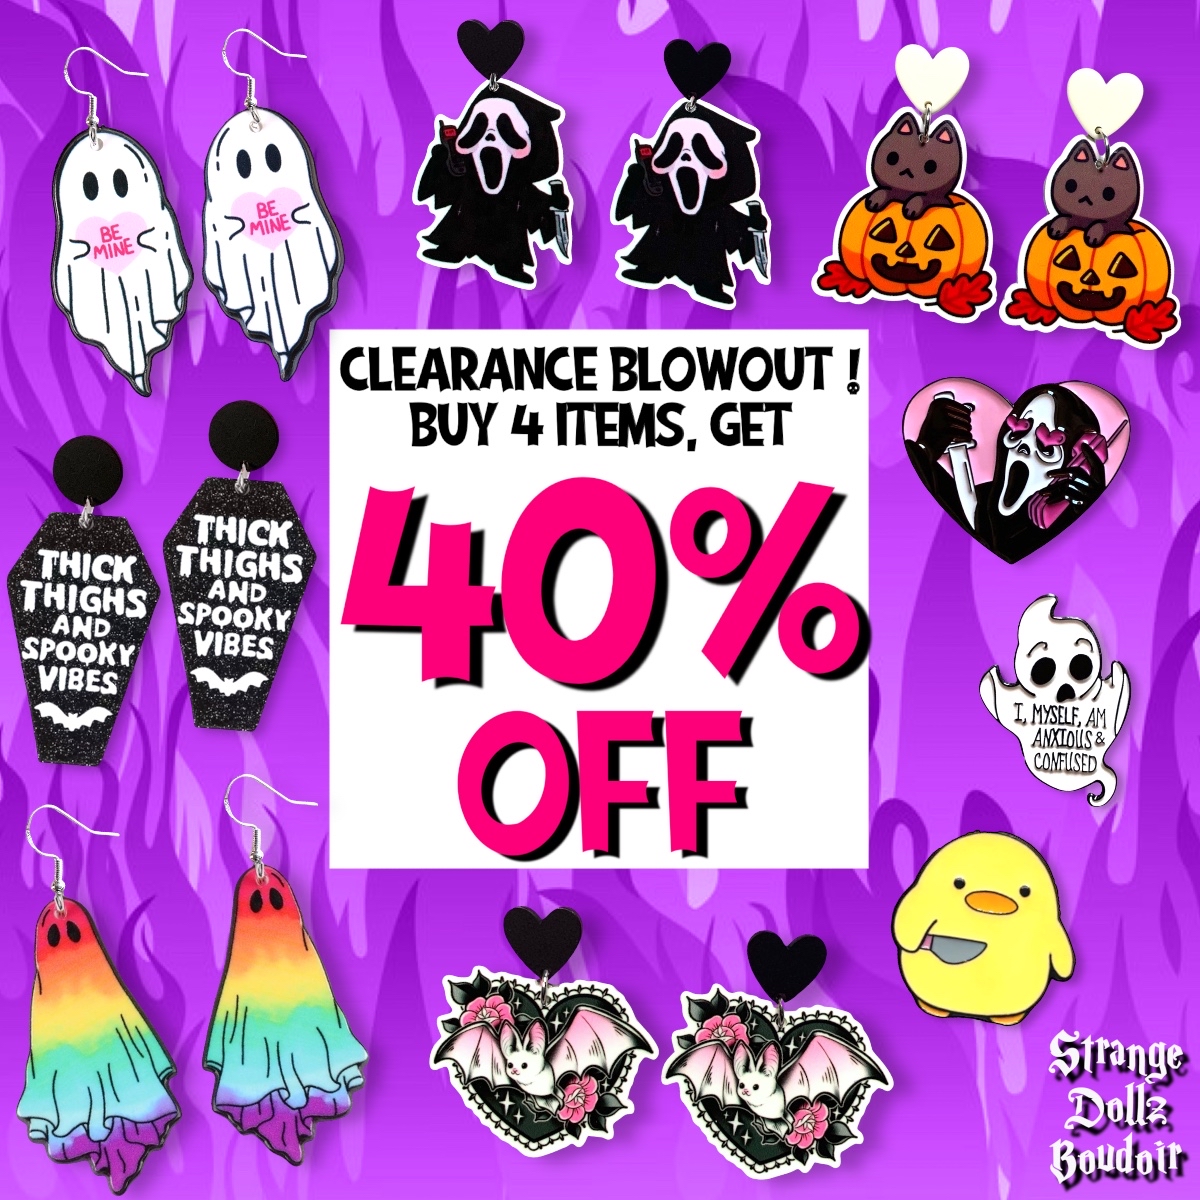 🔥 CLEARANCE BLOWOUT ! Buy 4 items = Get 40% off ! Visit our shop : strange-dollz-boudoir.myshopity.com - but be quick ! This deal ends TODAY at 00.00 !  #discount #clearance #summerdeal #discounts #pastelgoth #halloween #codeorange #kawaiigoth #halloweenshopping #summerween